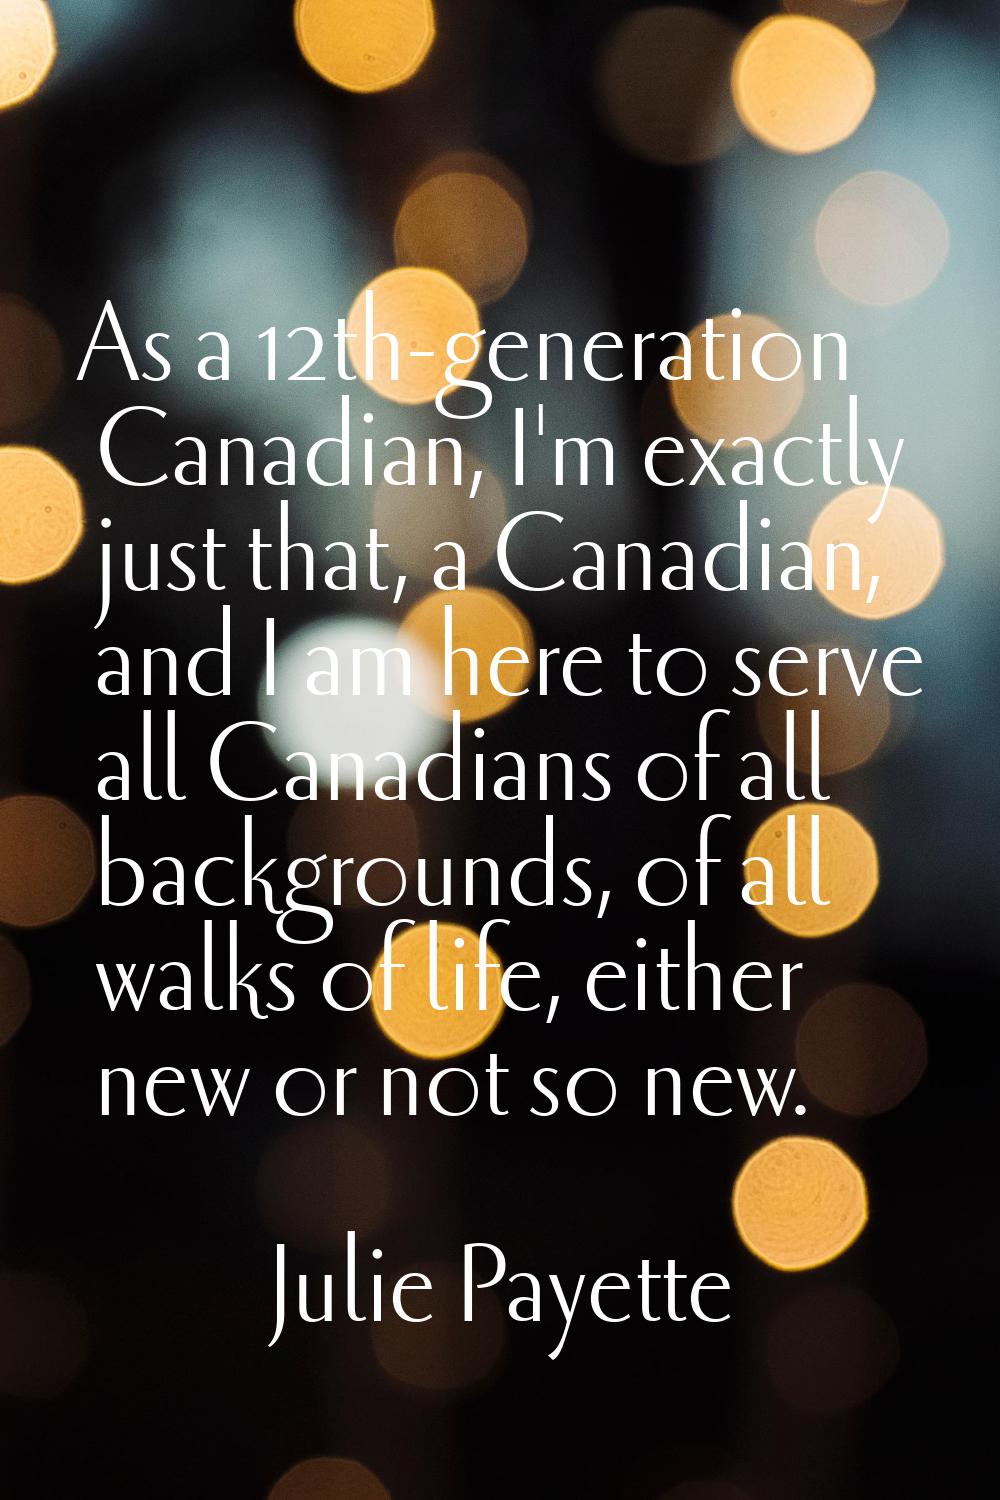 As a 12th-generation Canadian, I'm exactly just that, a Canadian, and I am here to serve all Canadi